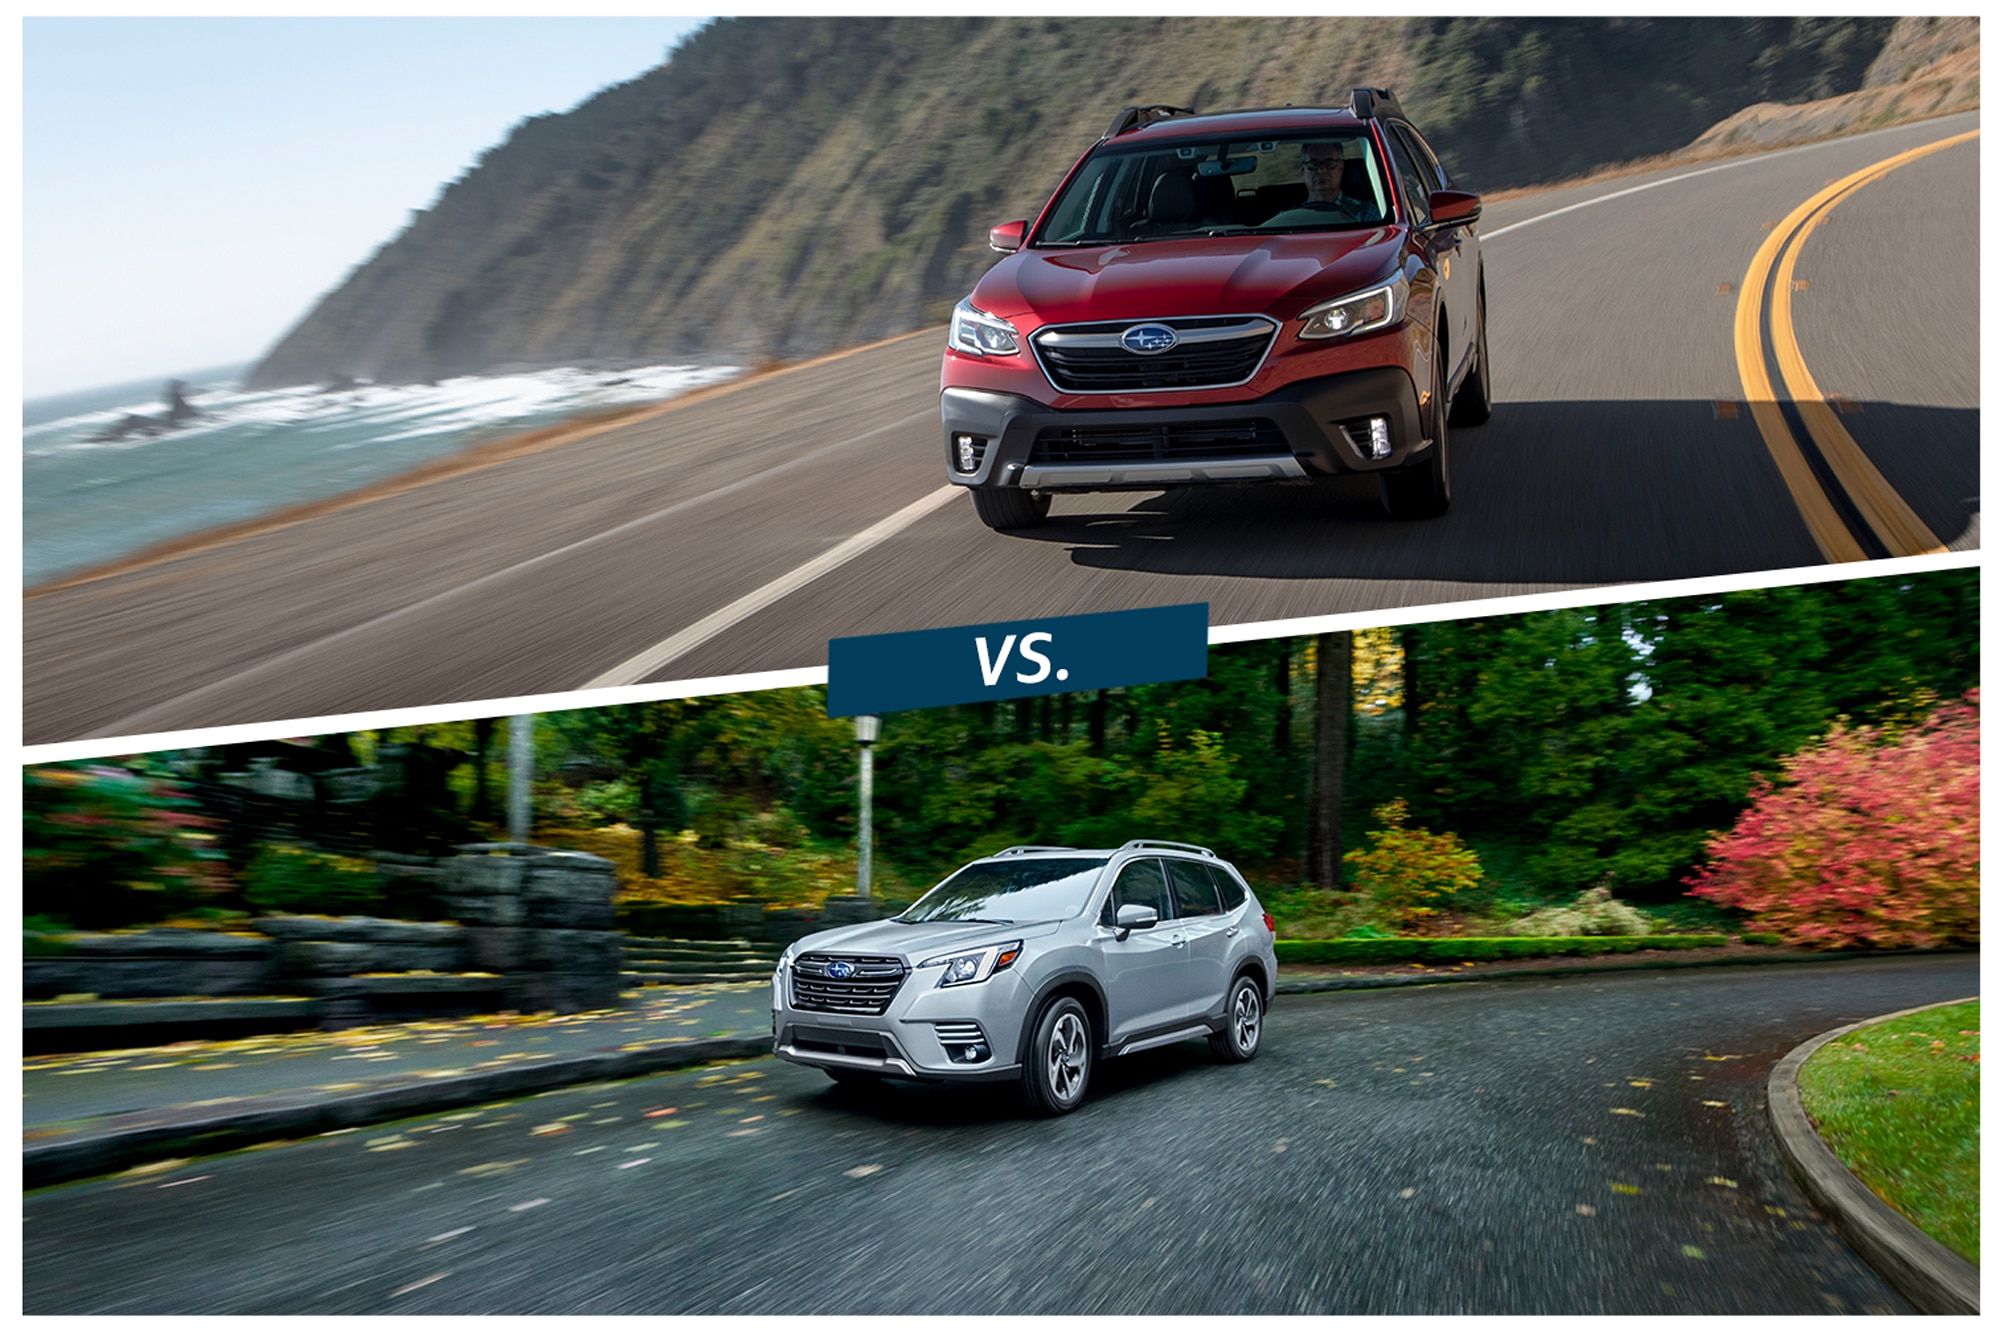 Subaru Outback and Subaru Forester Touring compared against each other